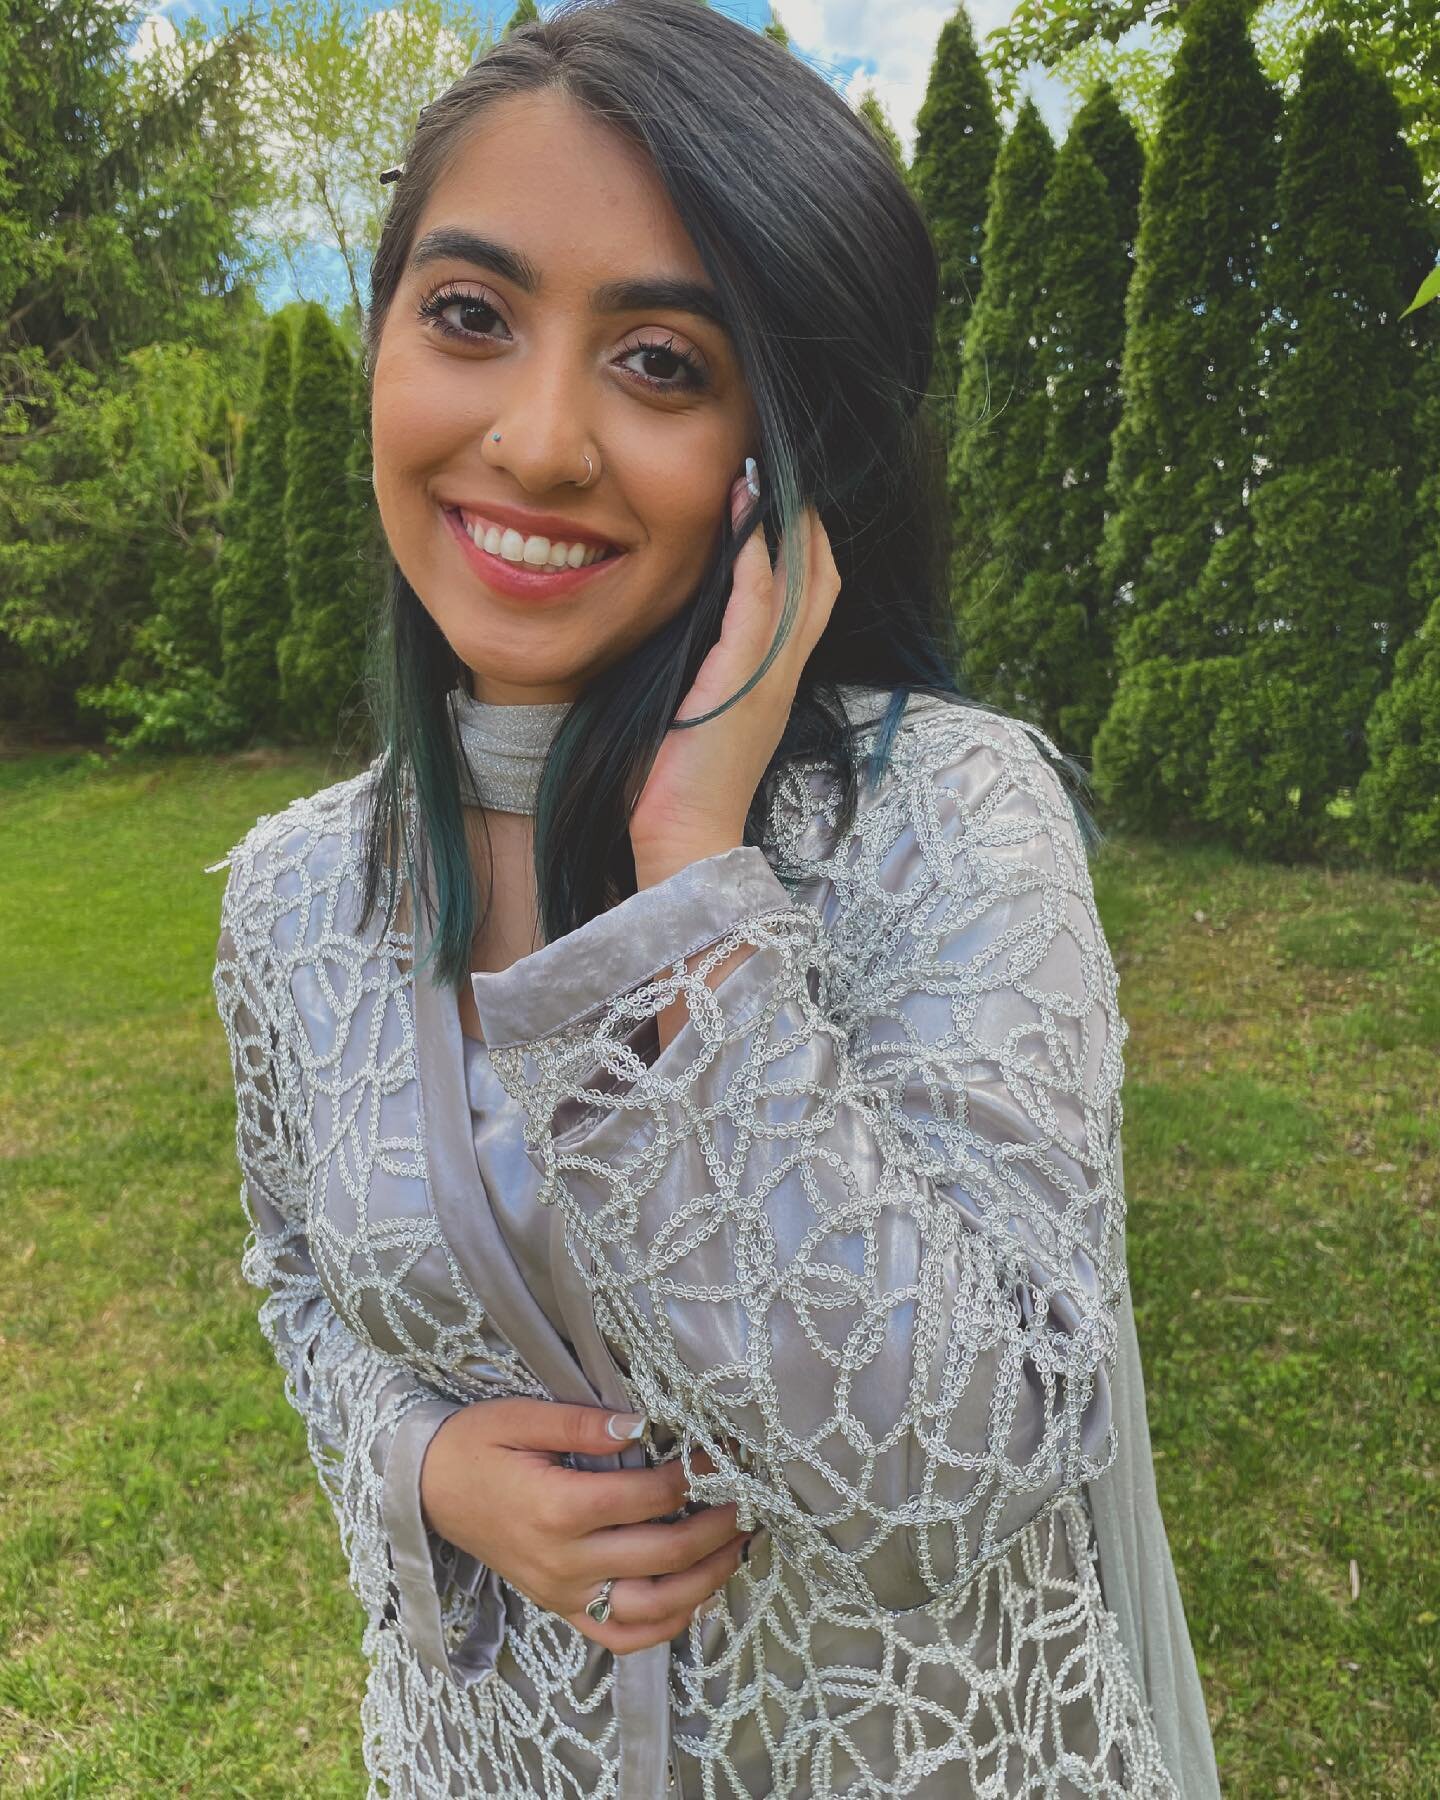 Eid Mubarak from NUMS YUMS 🌙 ⭐️ 🧁 I hope you all are having a blessed eid and enjoyed your eid desserts! 

I have some exciting News! I had an Interview with @staytunednbc for their Snapchat news channel for a small business feature segment. A part